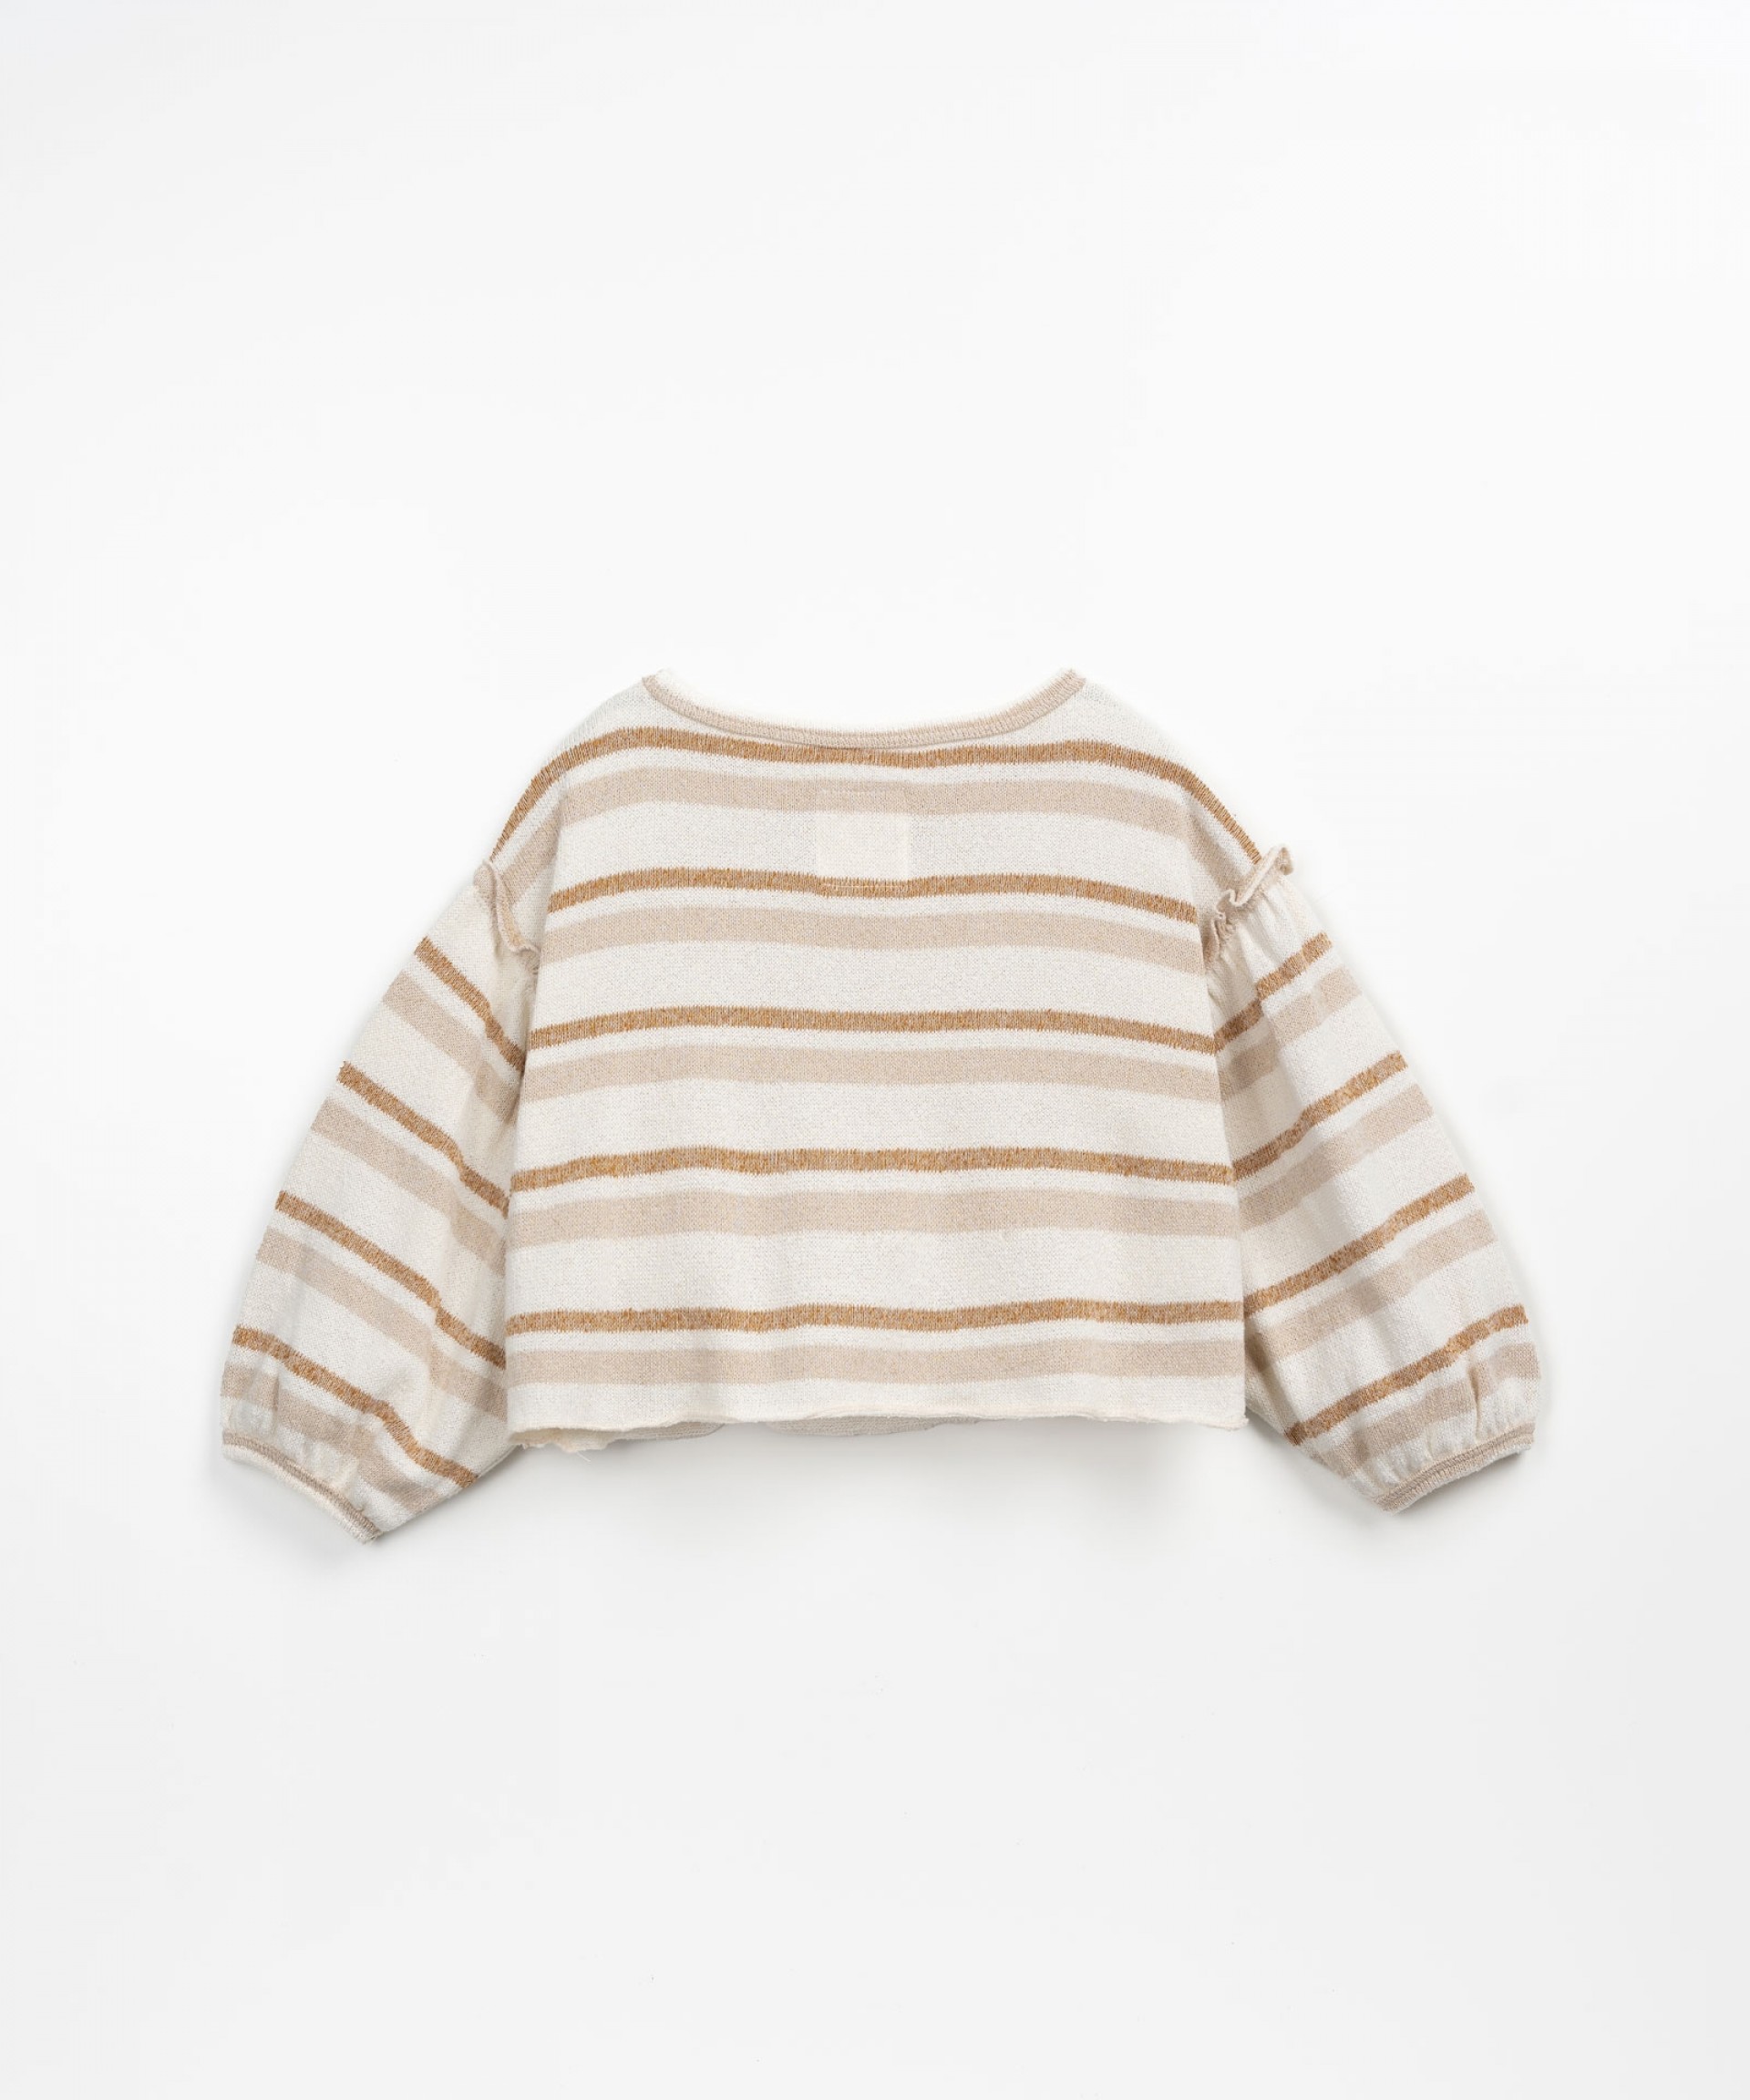 Striped cropped sweater | Textile Art